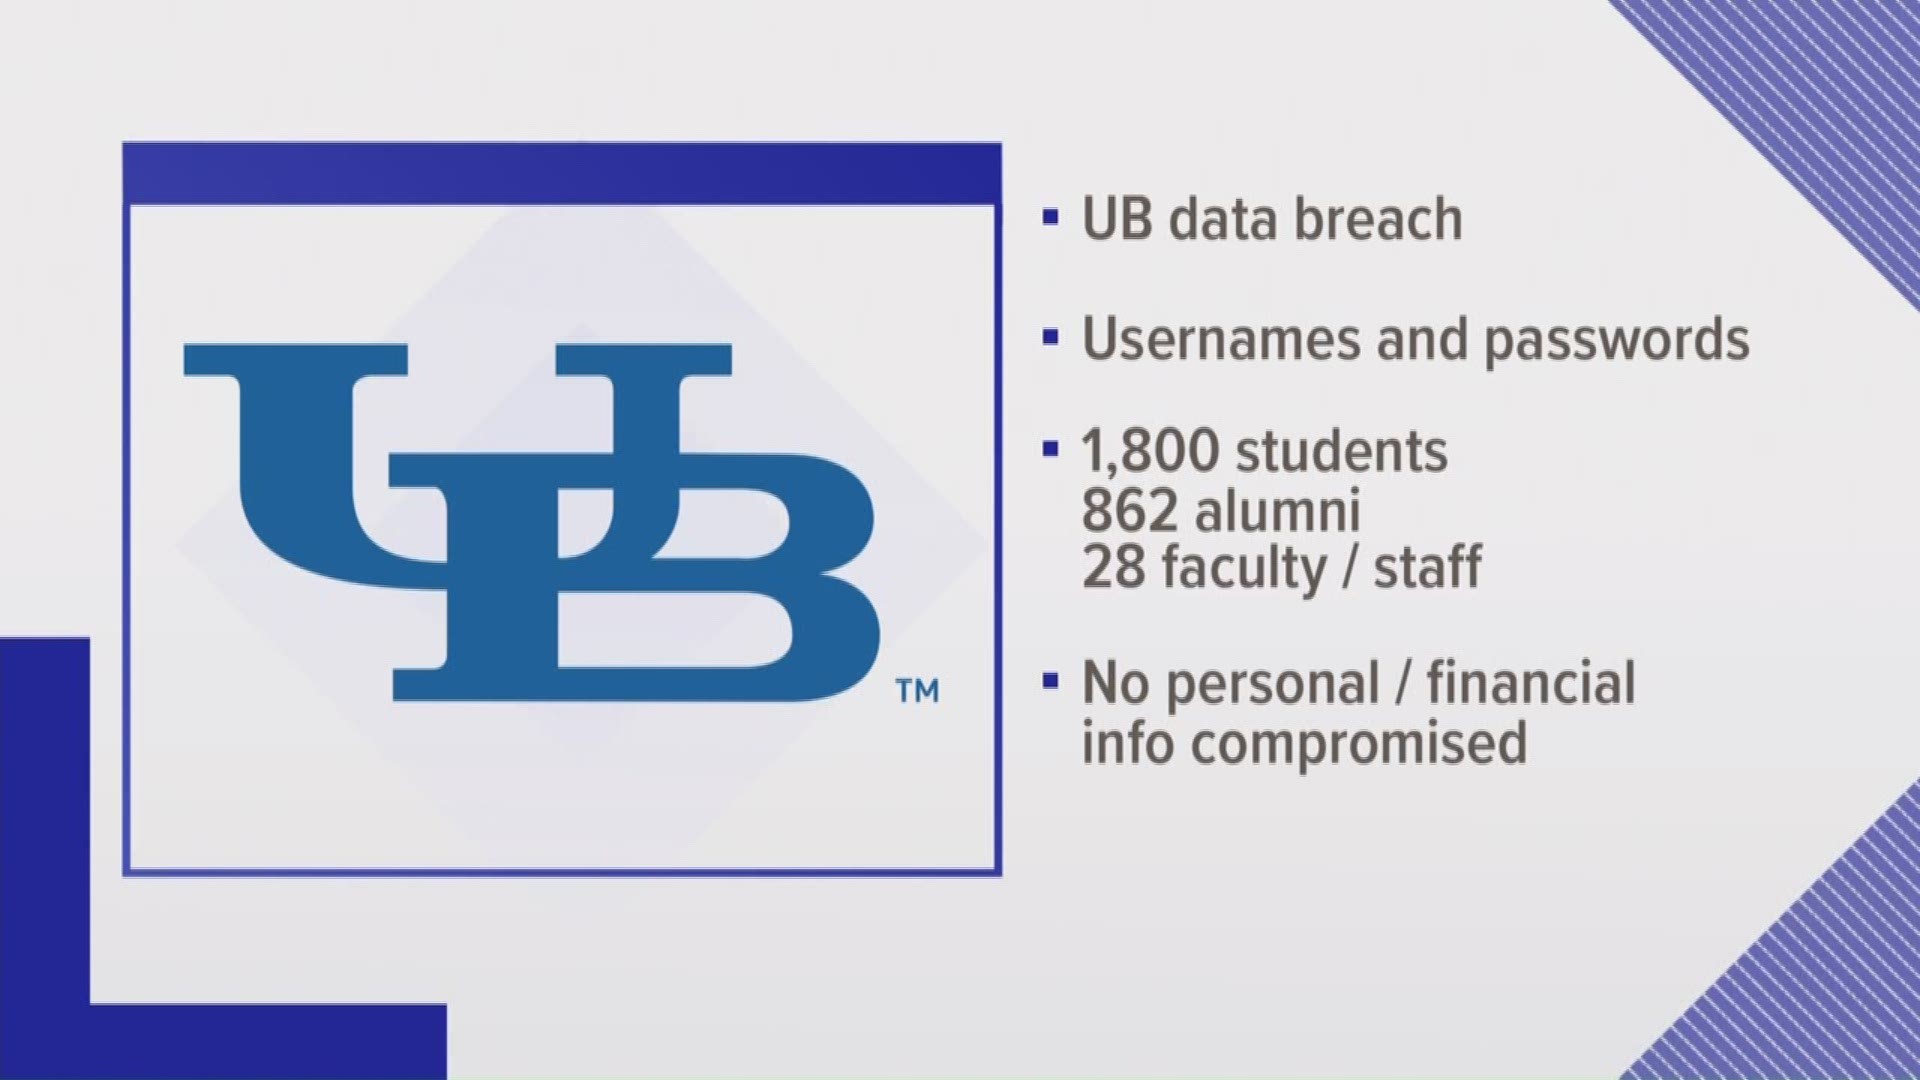 More than 2600 affected by data breach at UB